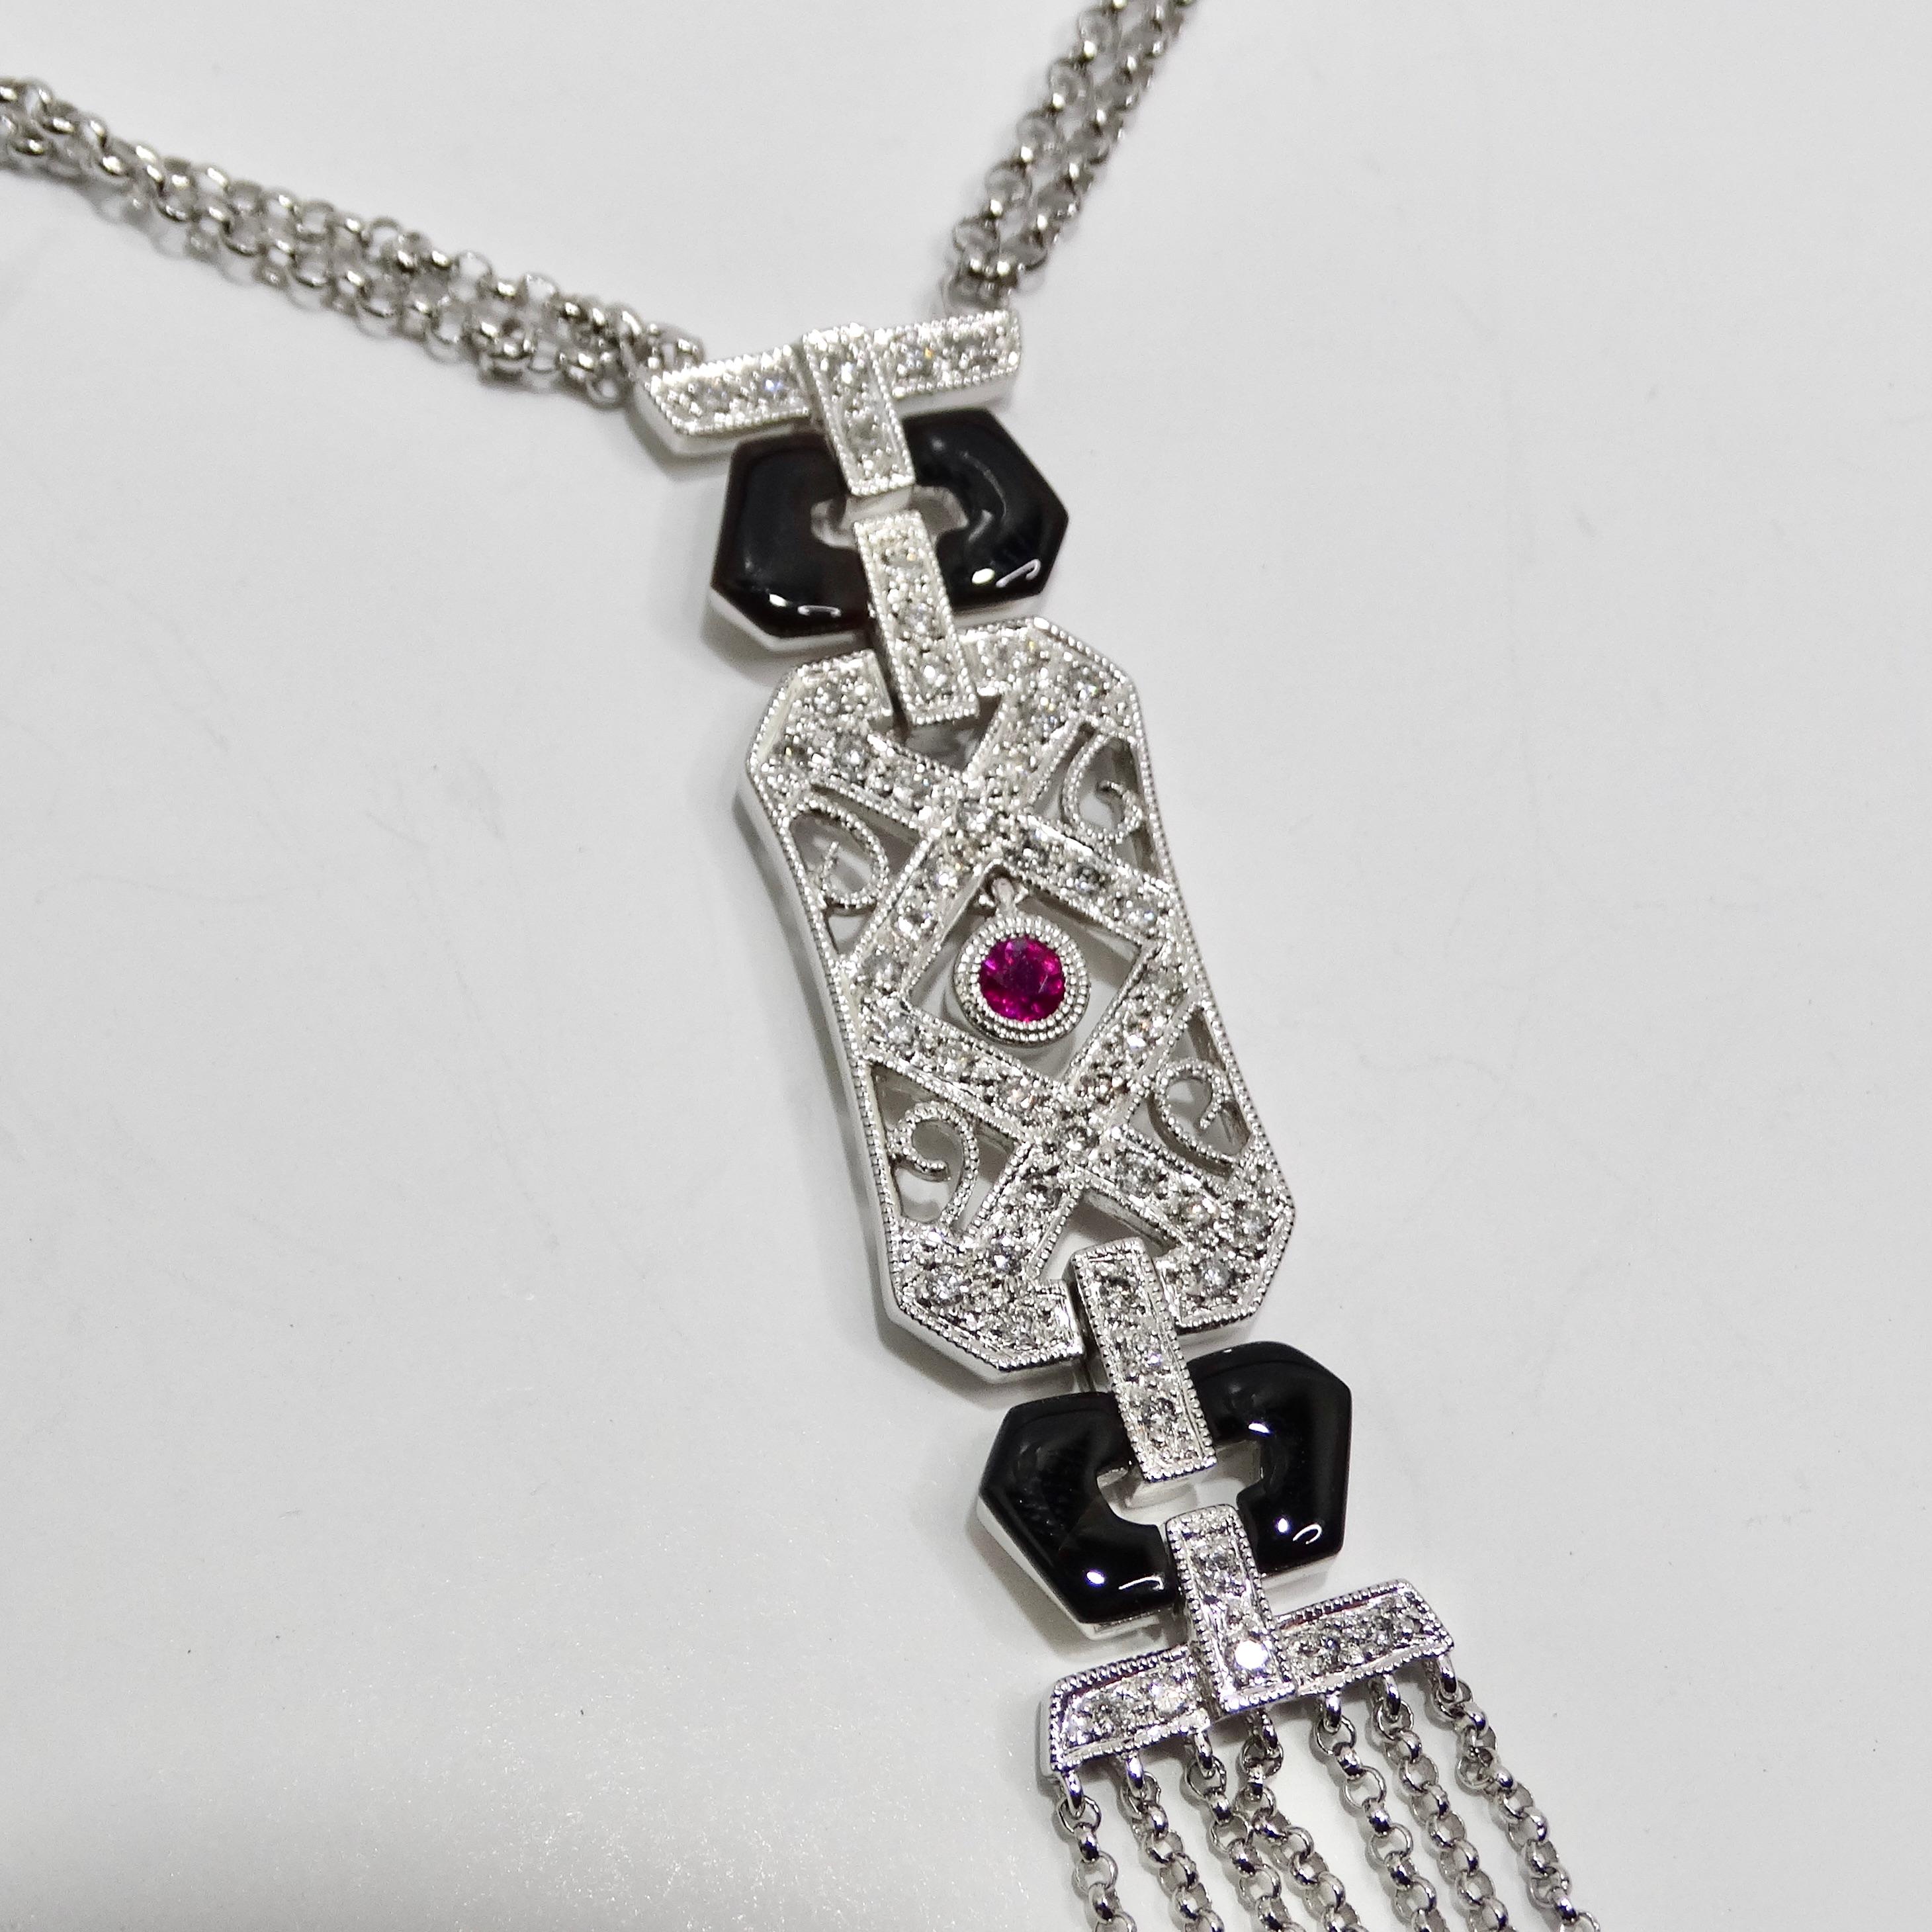 14K White Gold Diamond, Ruby, and Onyx Necklace For Sale 4